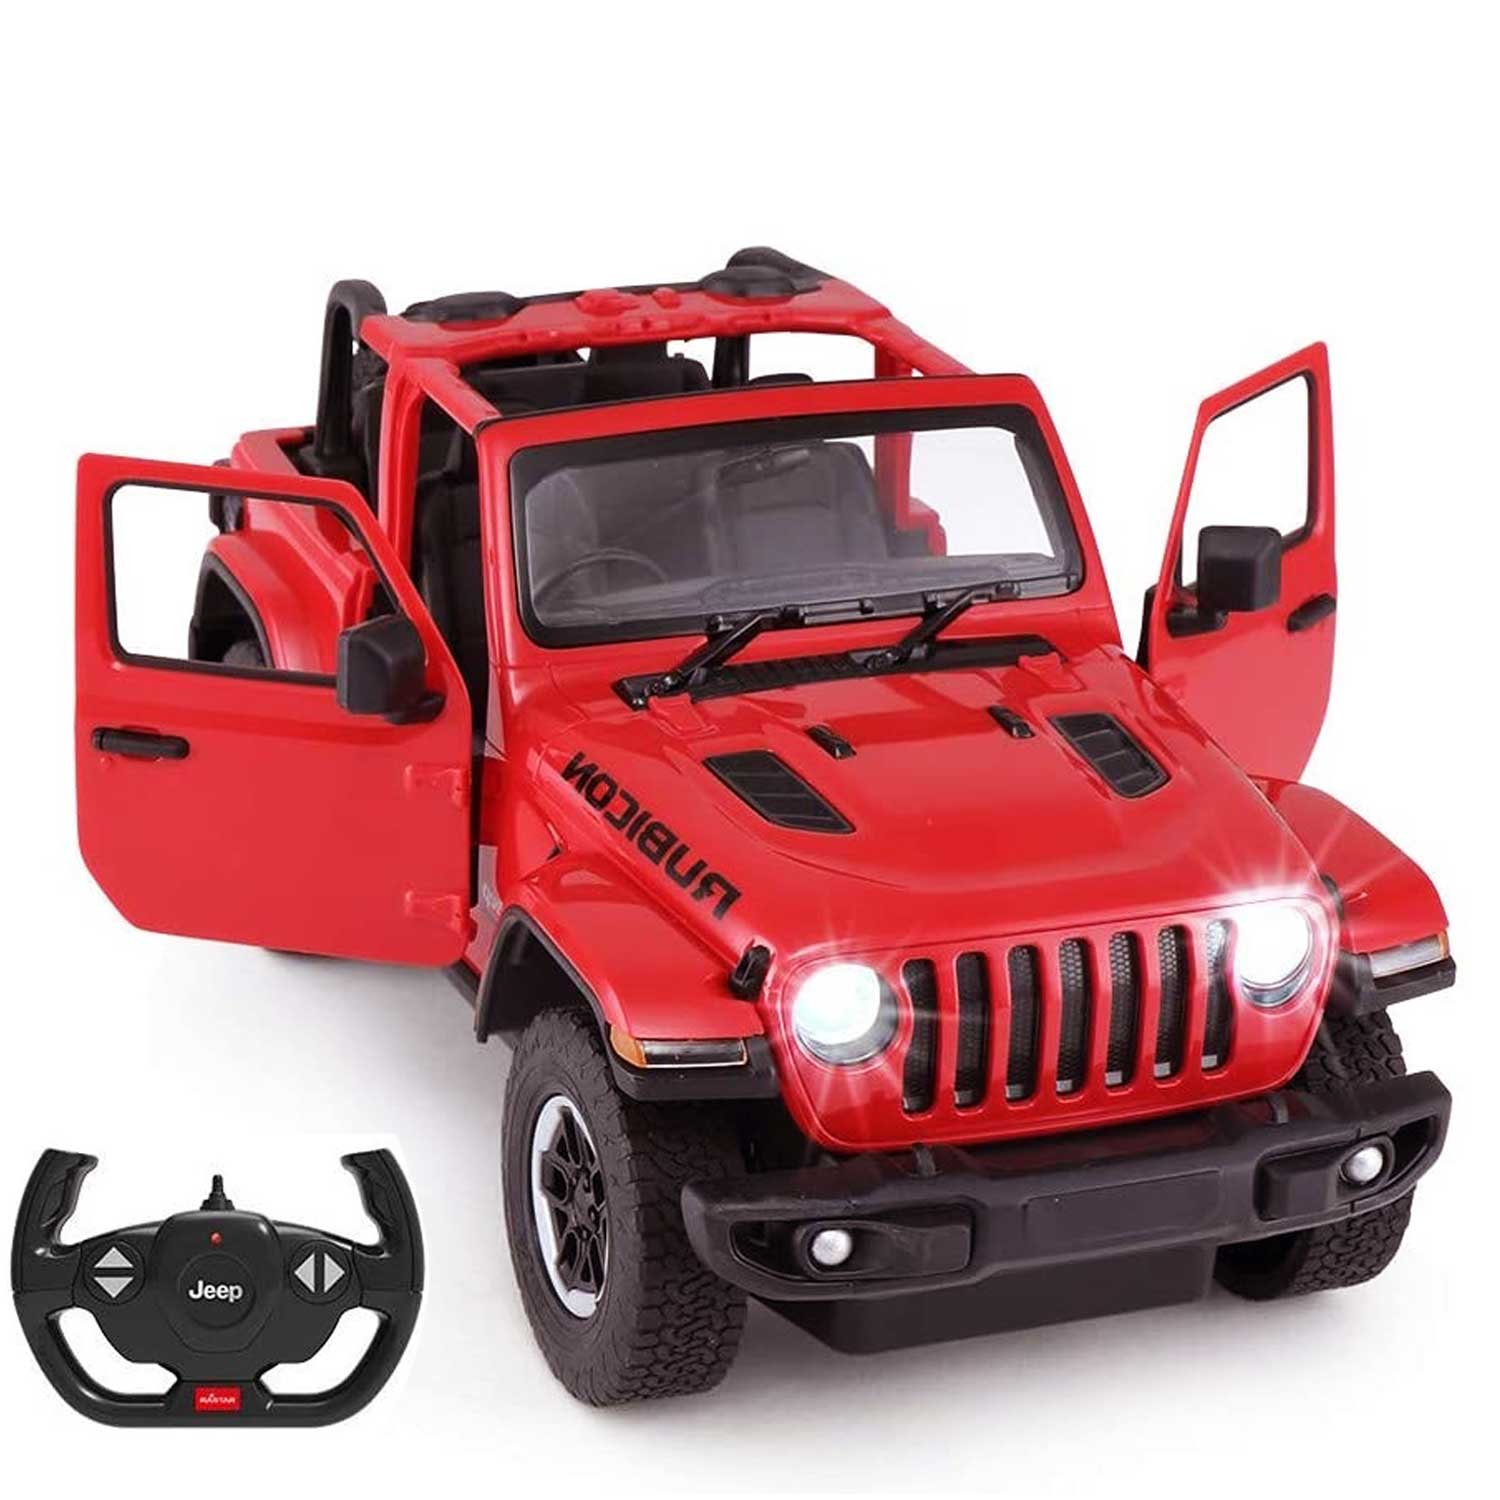 JWJL14R-Toys-RC-Jeep-Wrangler-With-Radio-Remote-Controlled-TOY-Vehicle-for-Kids-and-Adult.jpg